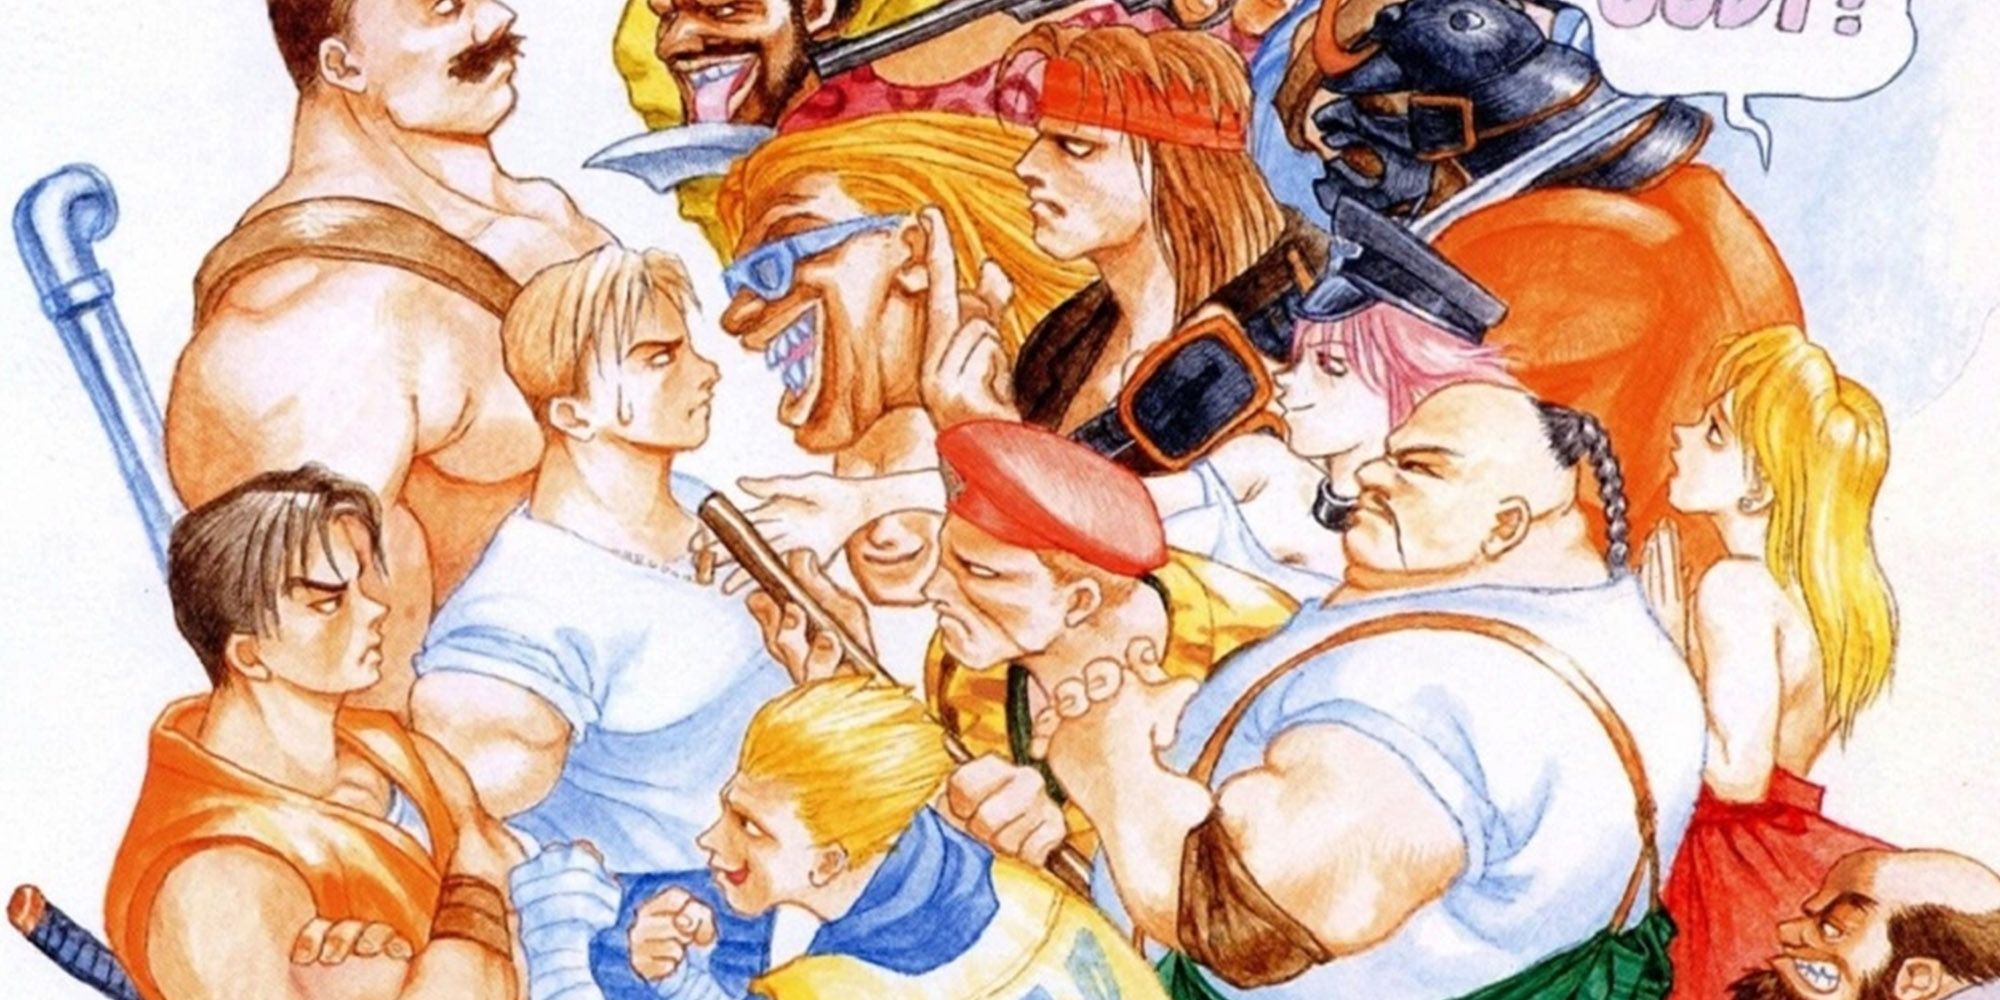 Final Fight - Promotional Art Showing Most Of The Big Characters In The Game